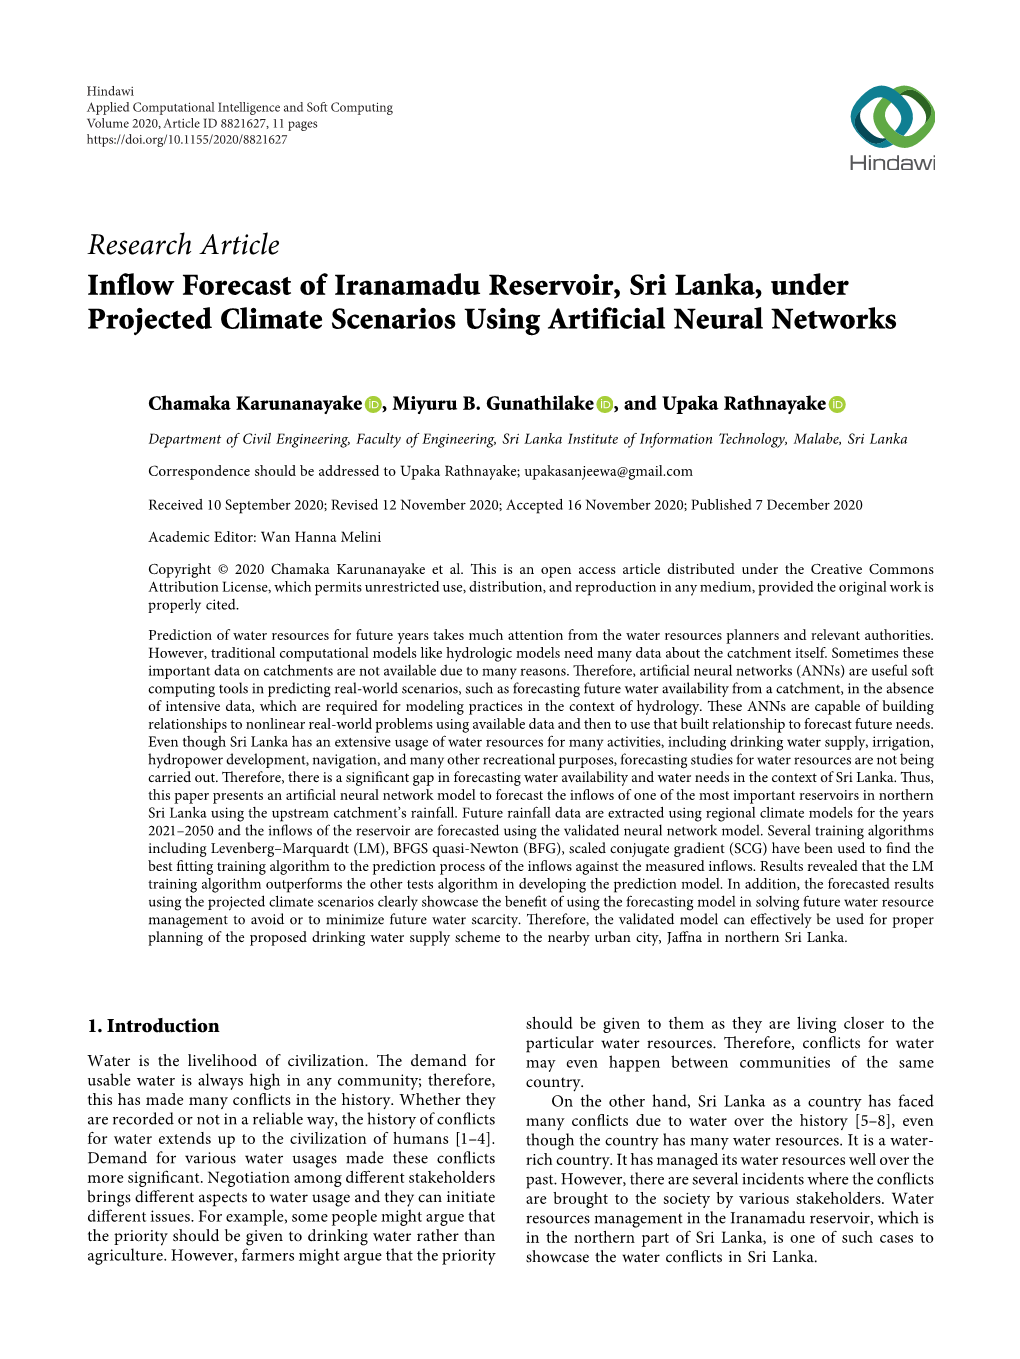 Inflow Forecast of Iranamadu Reservoir, Sri Lanka, Under Projected Climate Scenarios Using Artificial Neural Networks